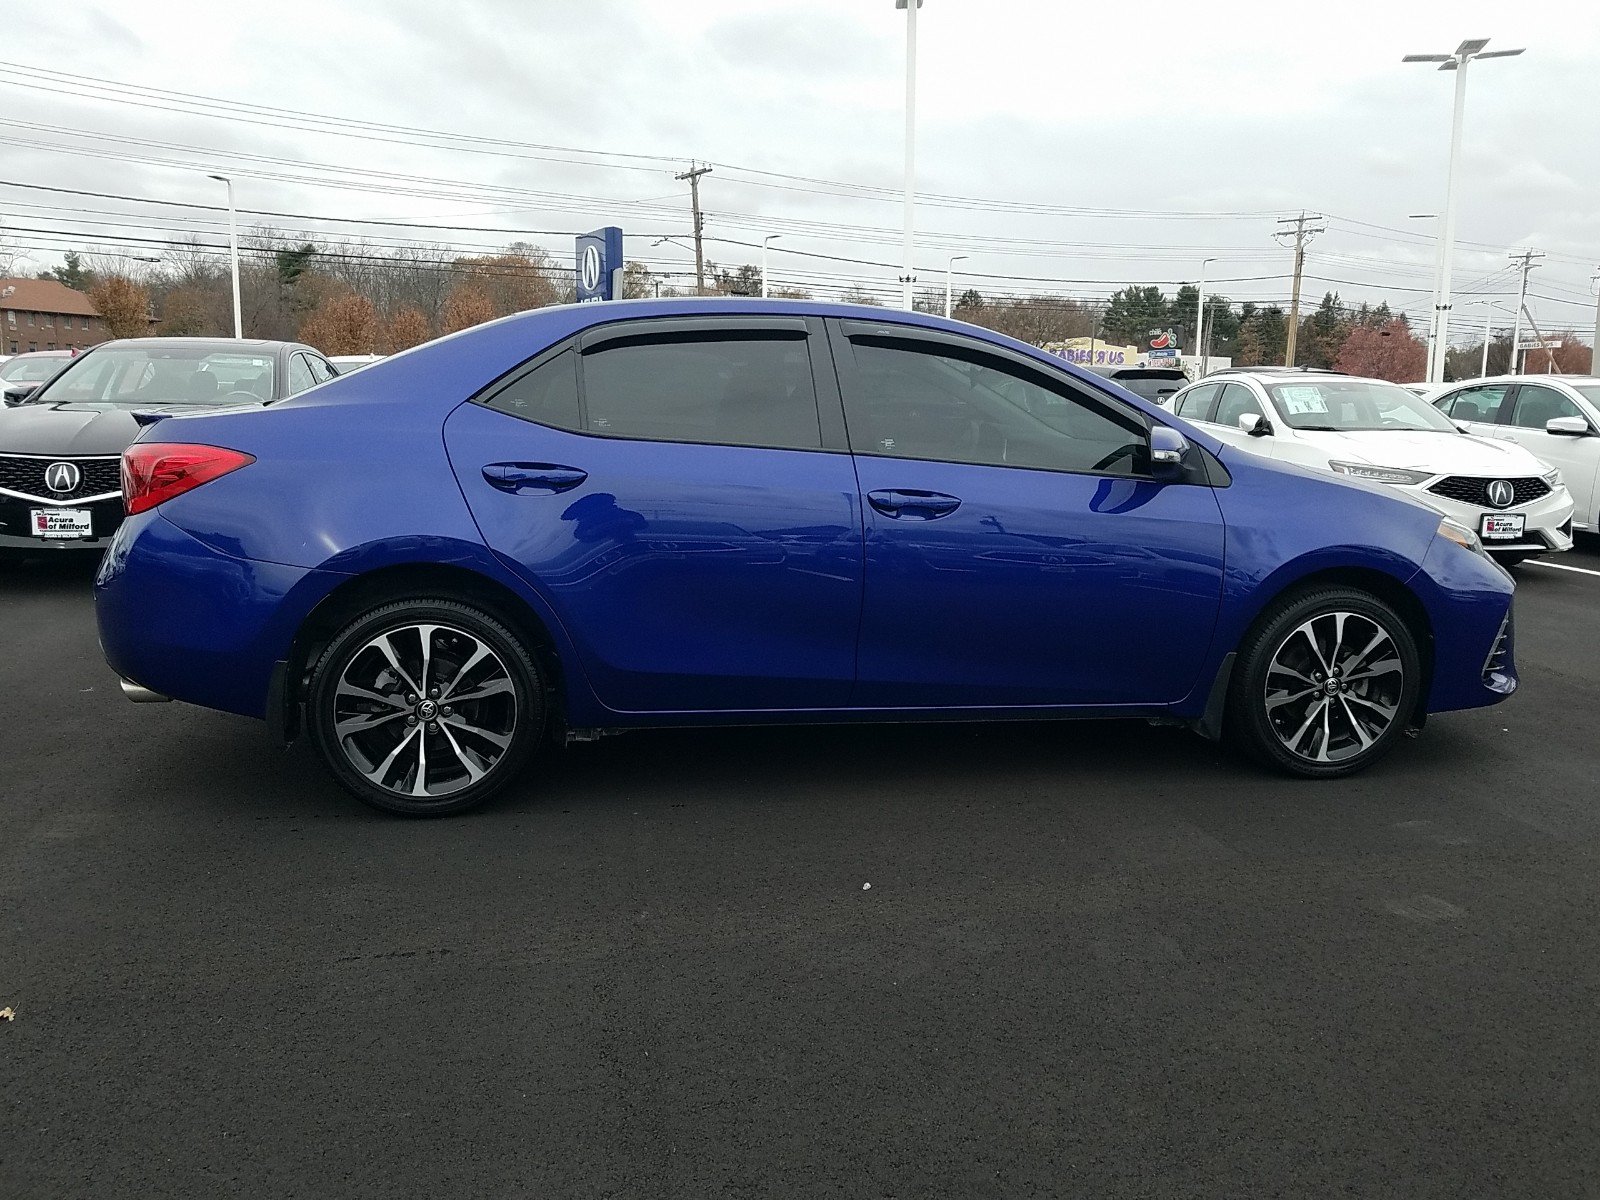 Pre-Owned 2018 Toyota Corolla SE 4dr Car in Milford #3970 | Acura of ...